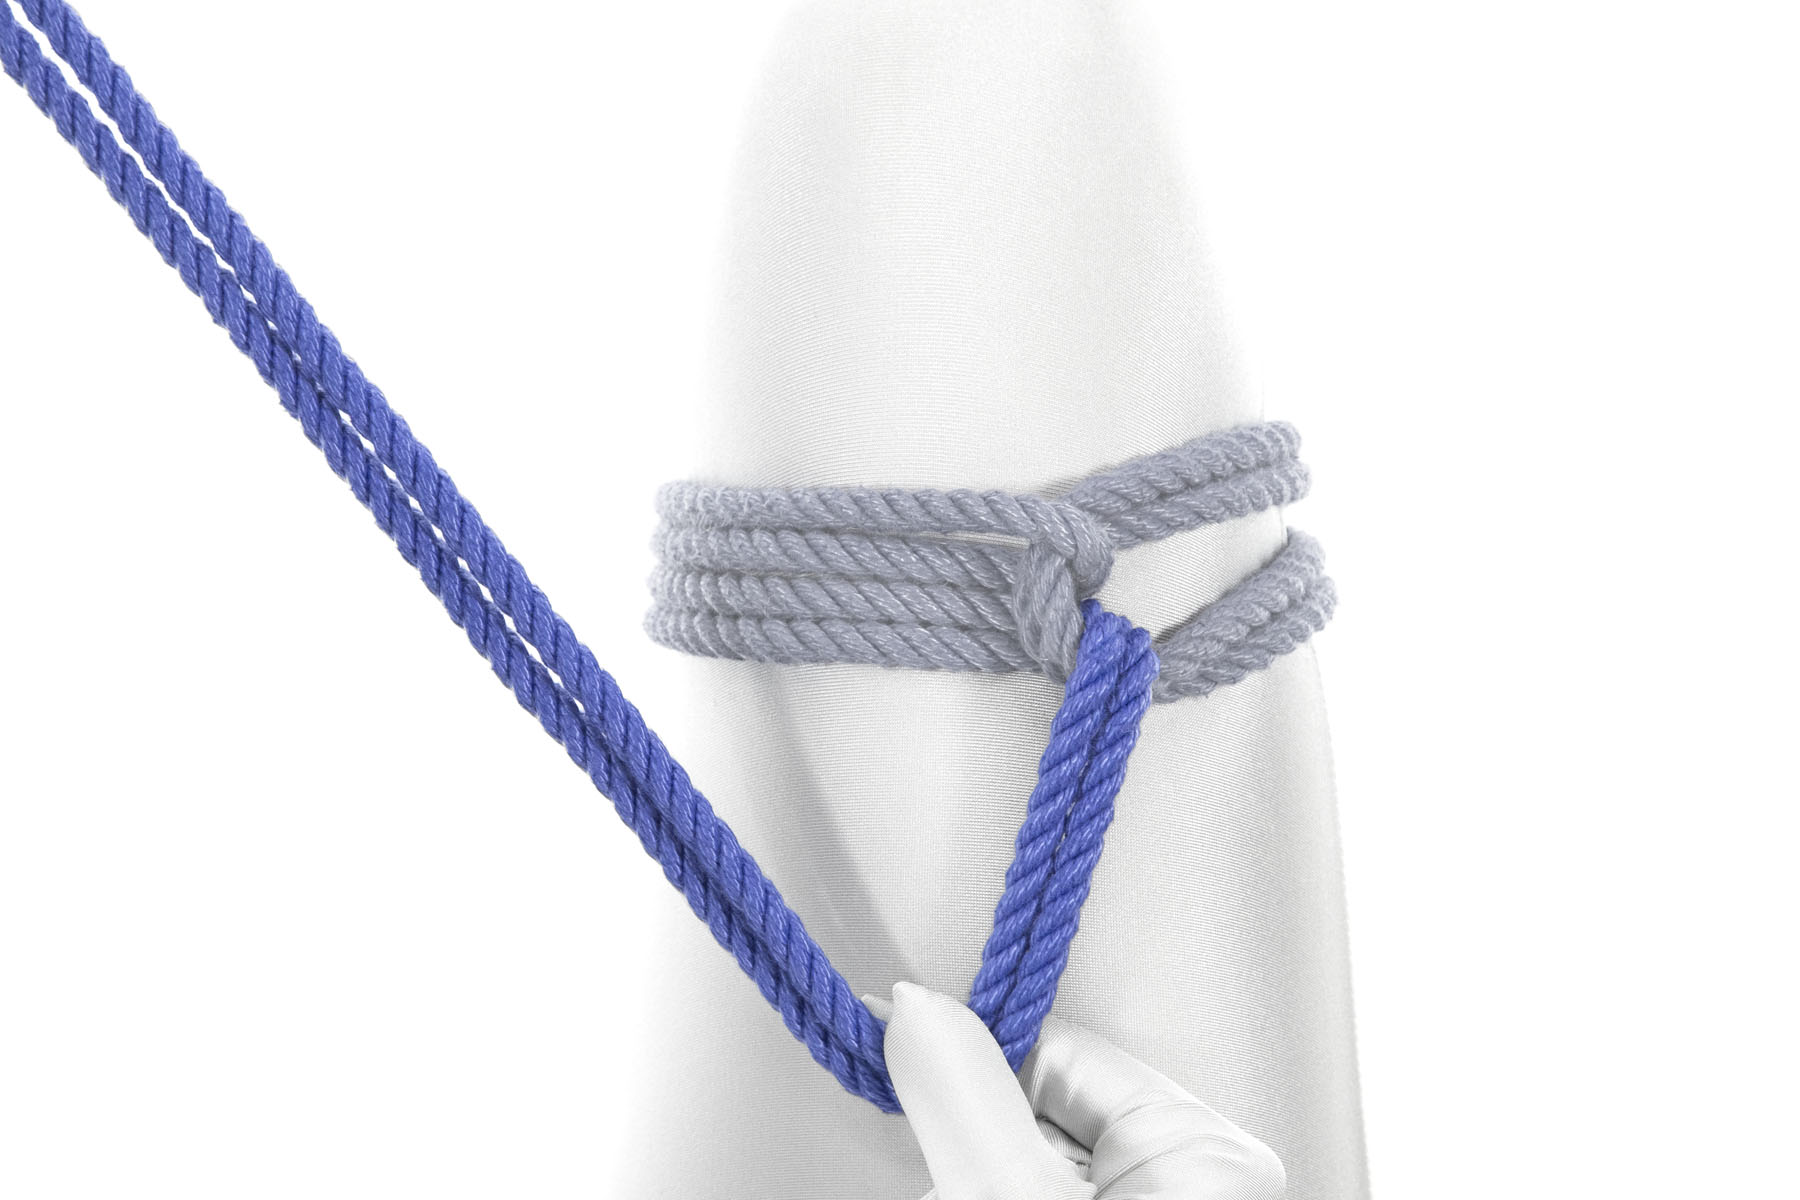 The rigger has pulled the working end to the left and up their thigh. Four inches along its length, they have pinched the rope between their thumb and forefinger. Their left hand is pulling the remainder of the working end to the left and down the thigh, so the rope makes a triangle pointing toward the body.